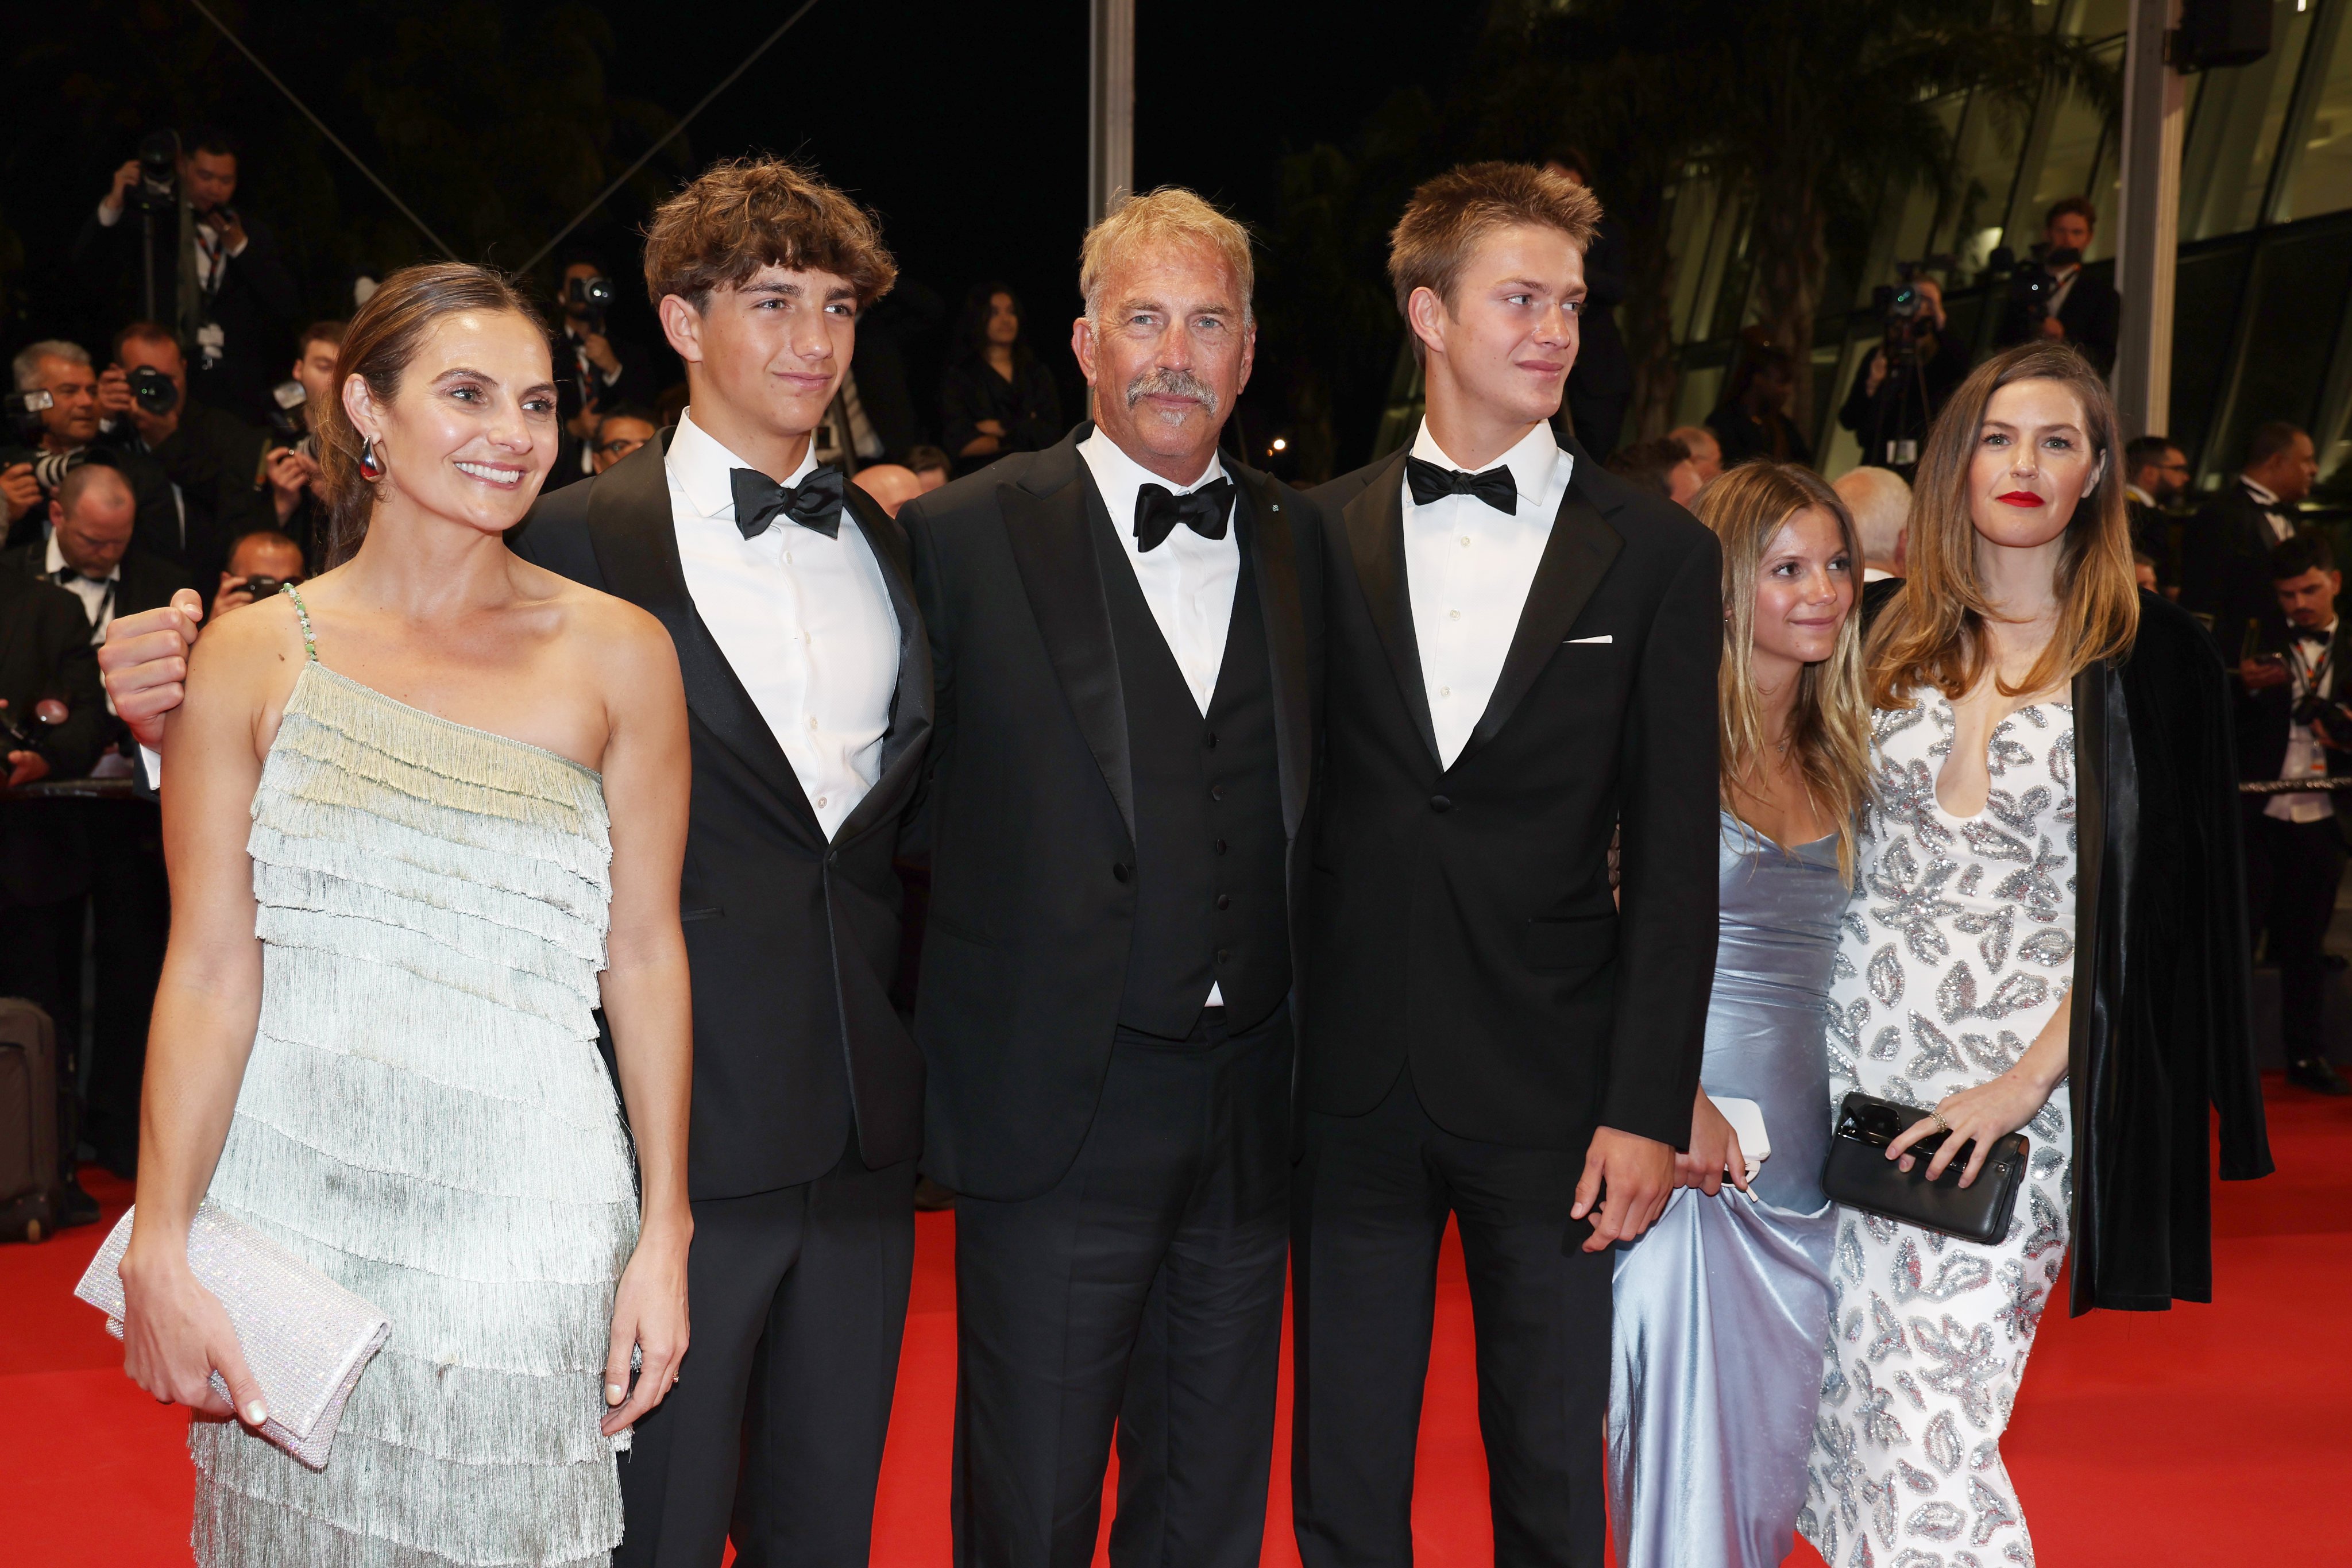 A Family Affair: actor Kevin Costner (centre) with his children Annie, Hayes, Cayden, Grace and Lily Costner at the 77th annual Cannes Film Festival. Photo: Getty Images